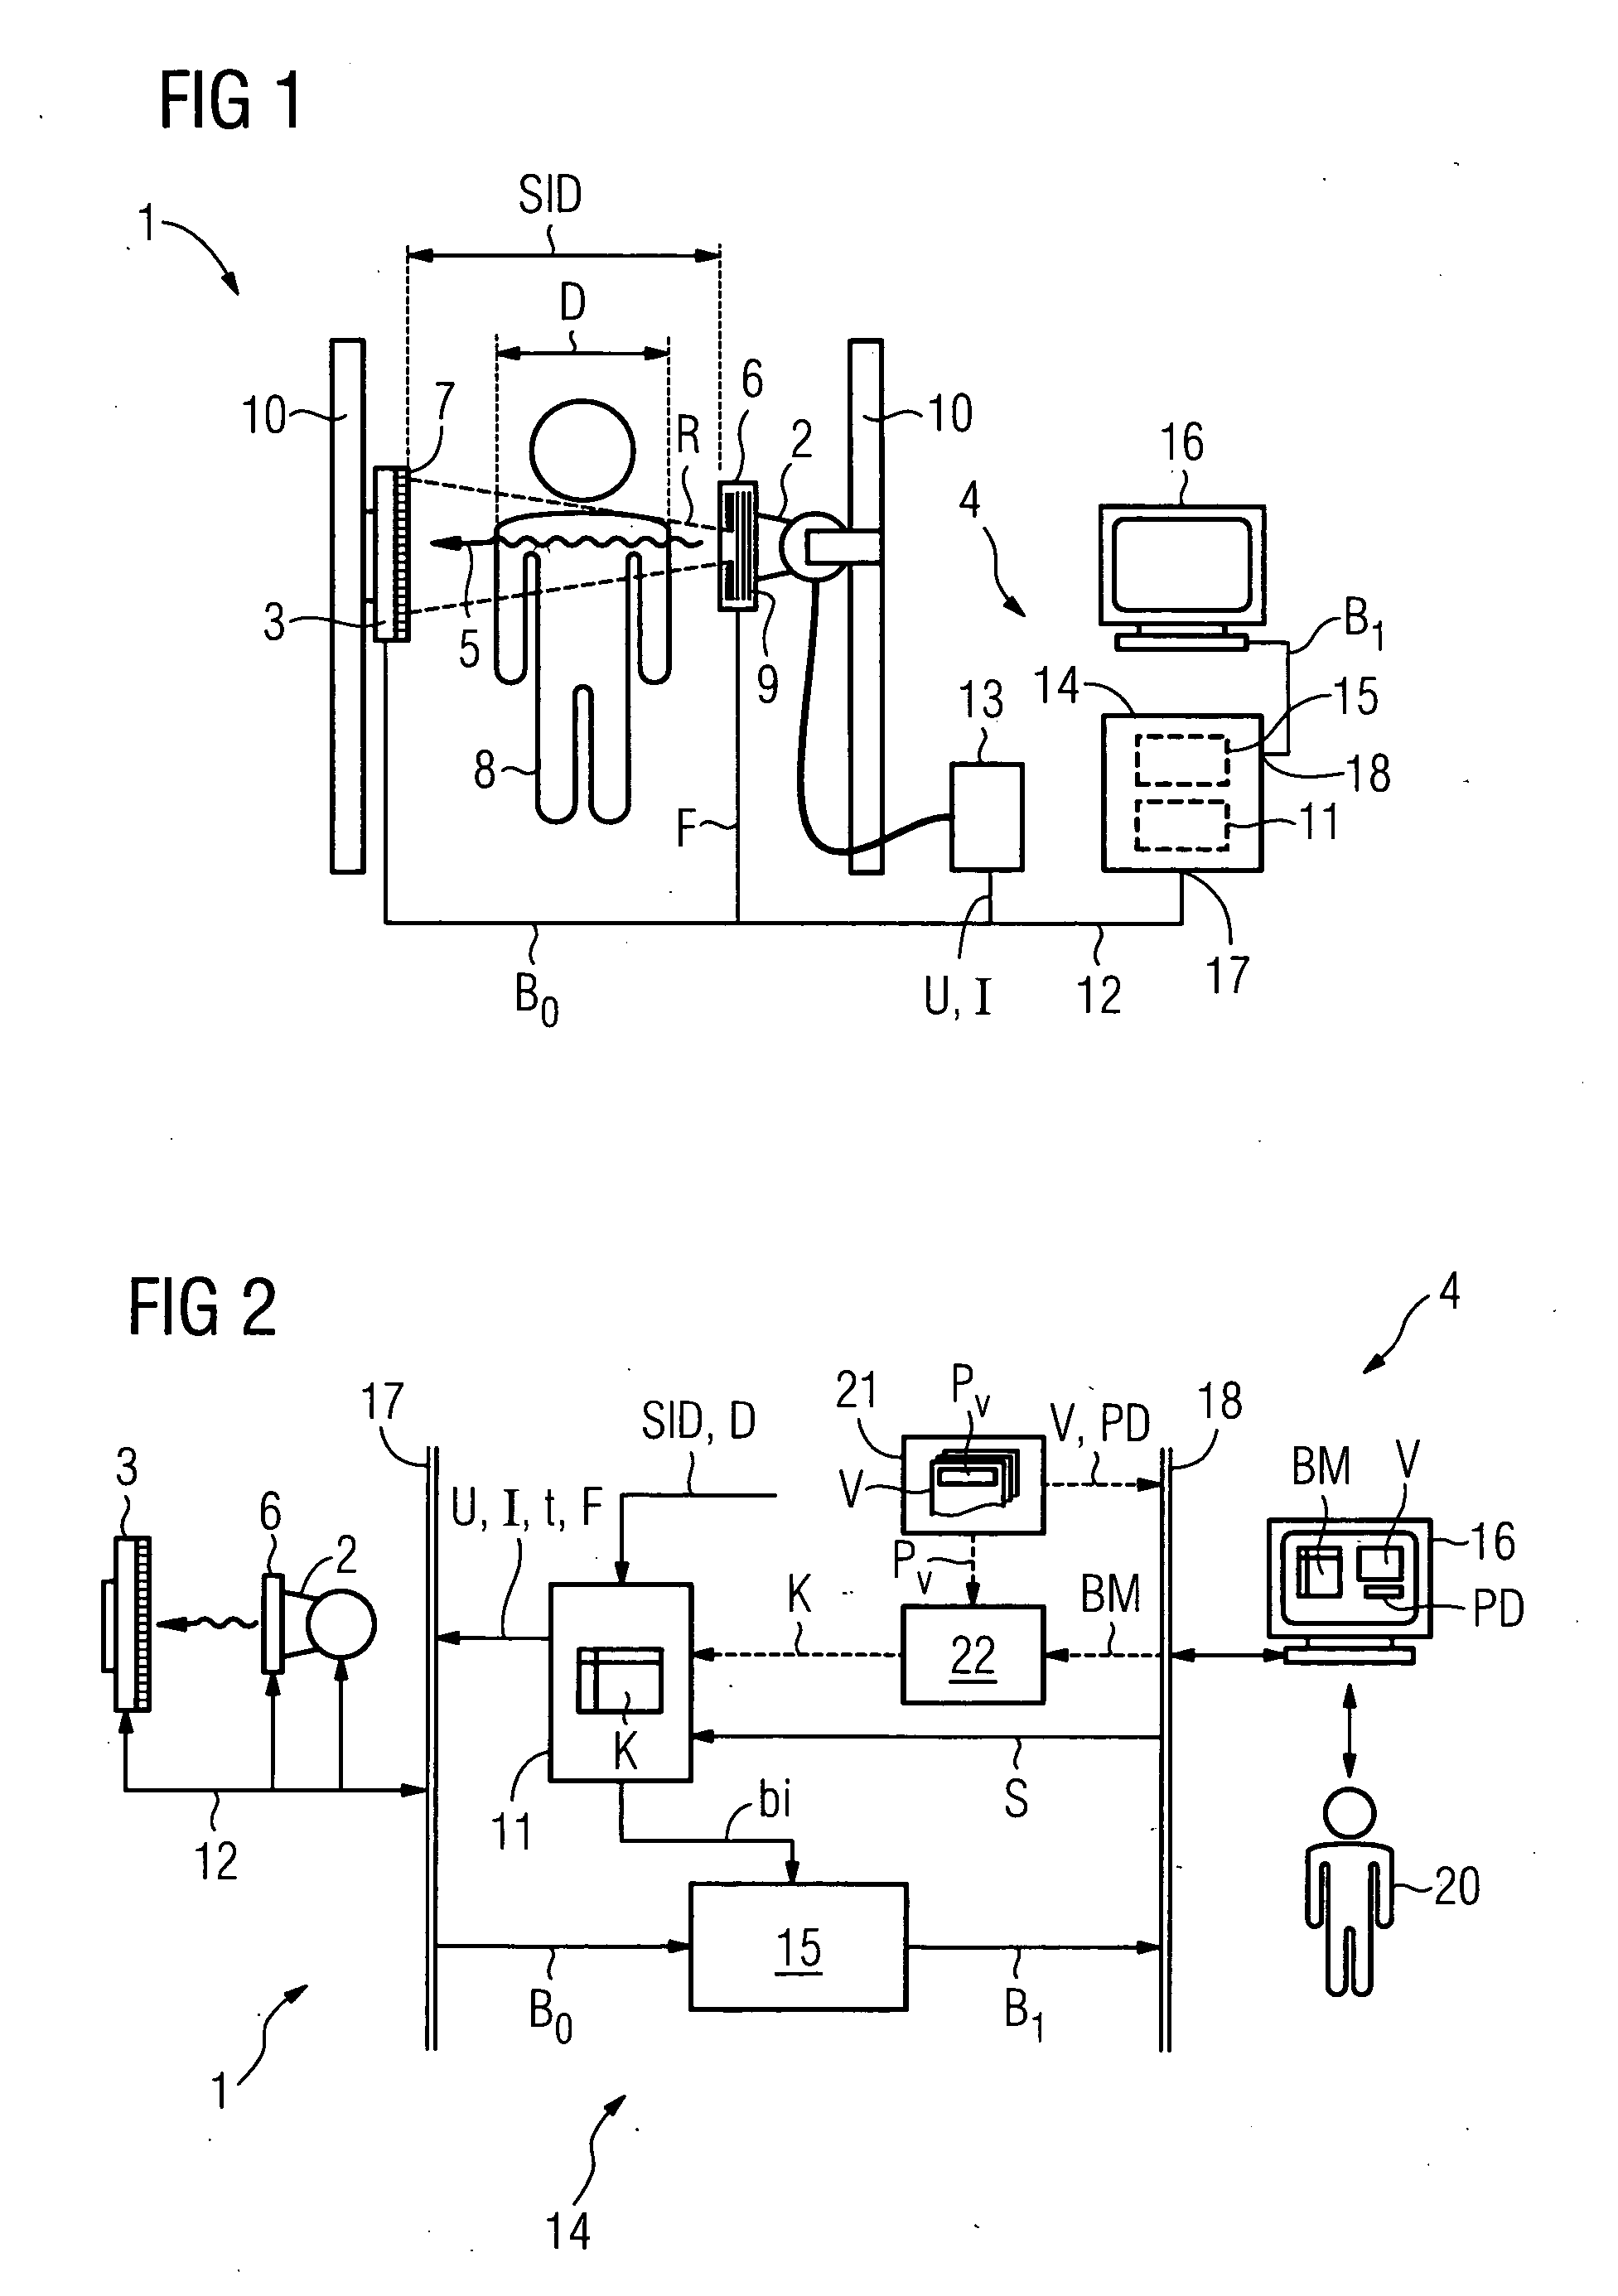 Method and device for user-specific parameterization of an x-ray device